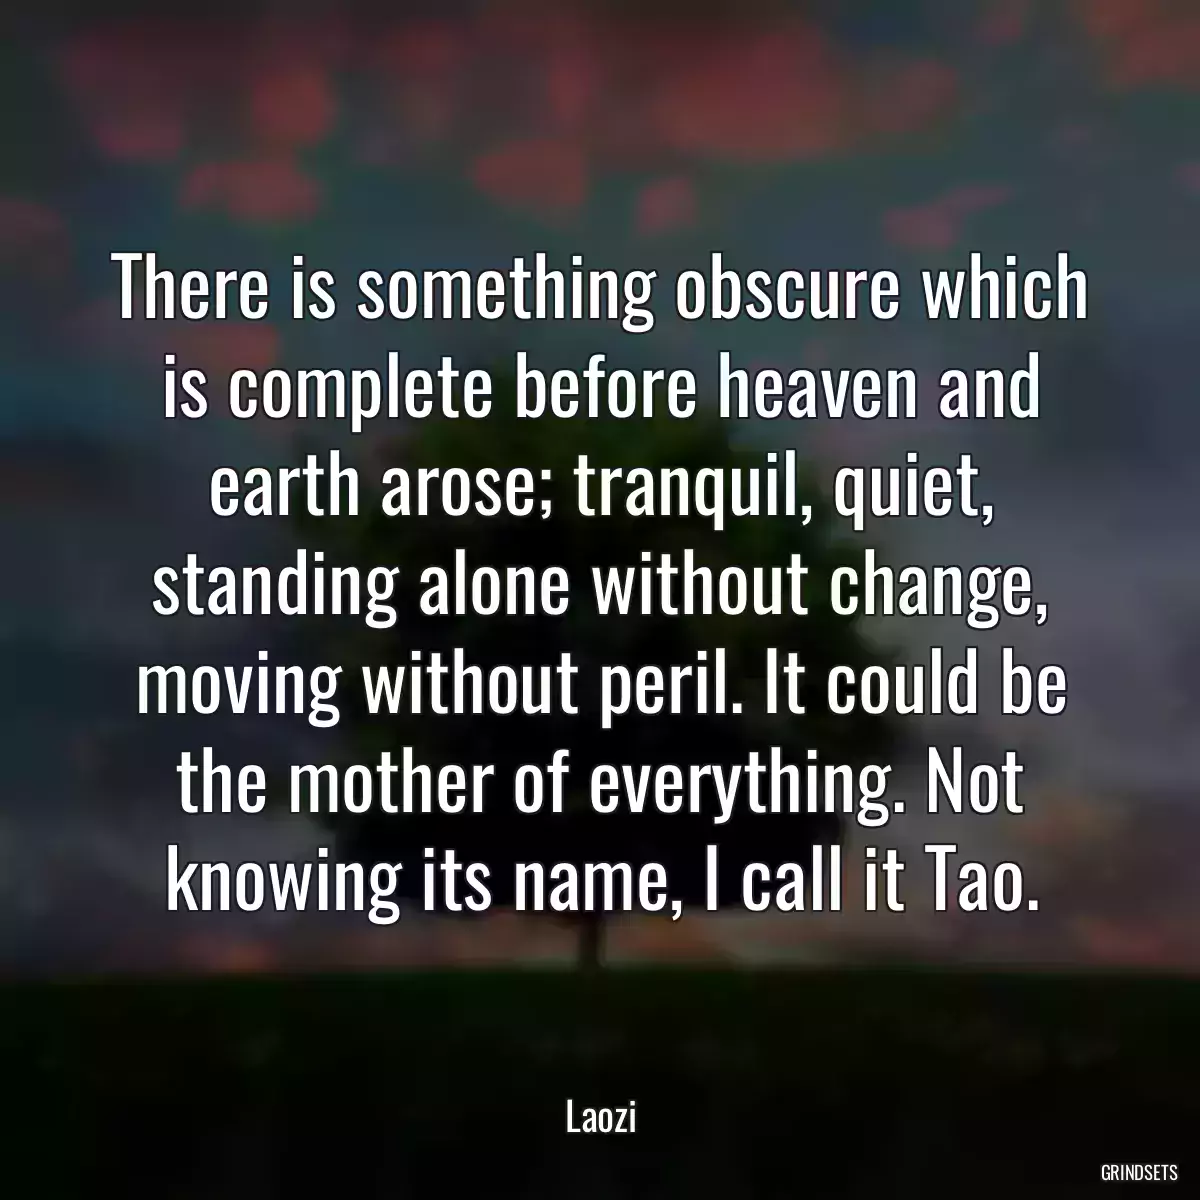 There is something obscure which is complete before heaven and earth arose; tranquil, quiet, standing alone without change, moving without peril. It could be the mother of everything. Not knowing its name, I call it Tao.